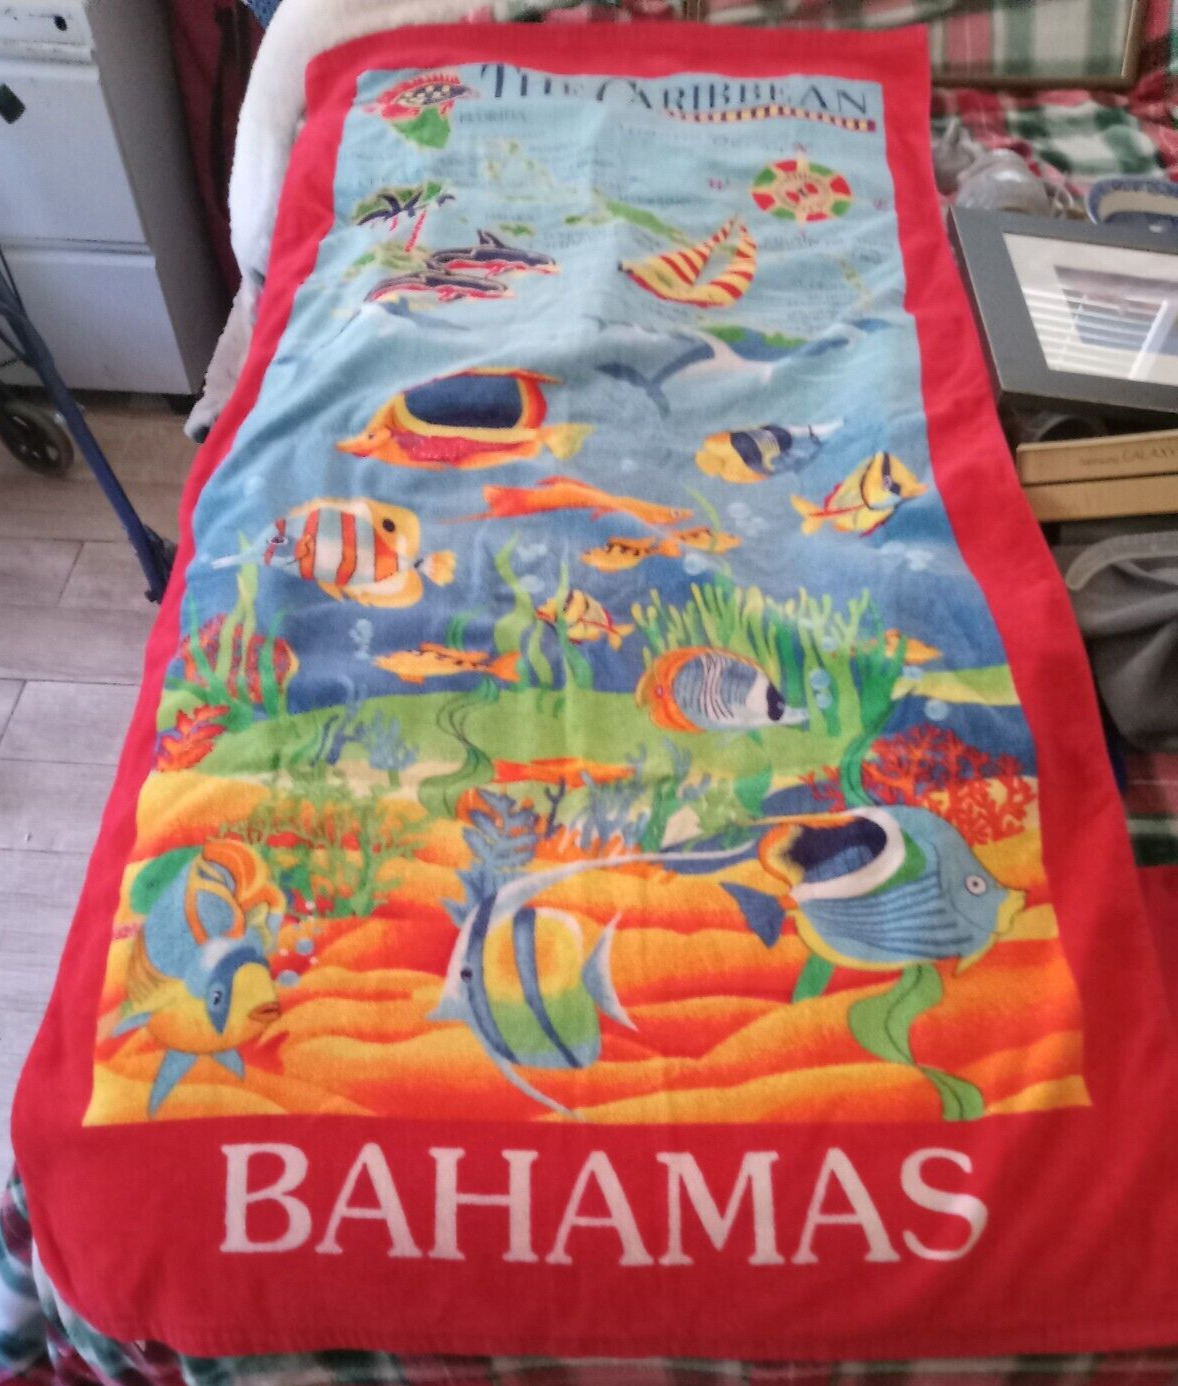 Bahamas Beach Towel Large Colorful 58-in by 29-in Souvenir Towel 100% Cotton